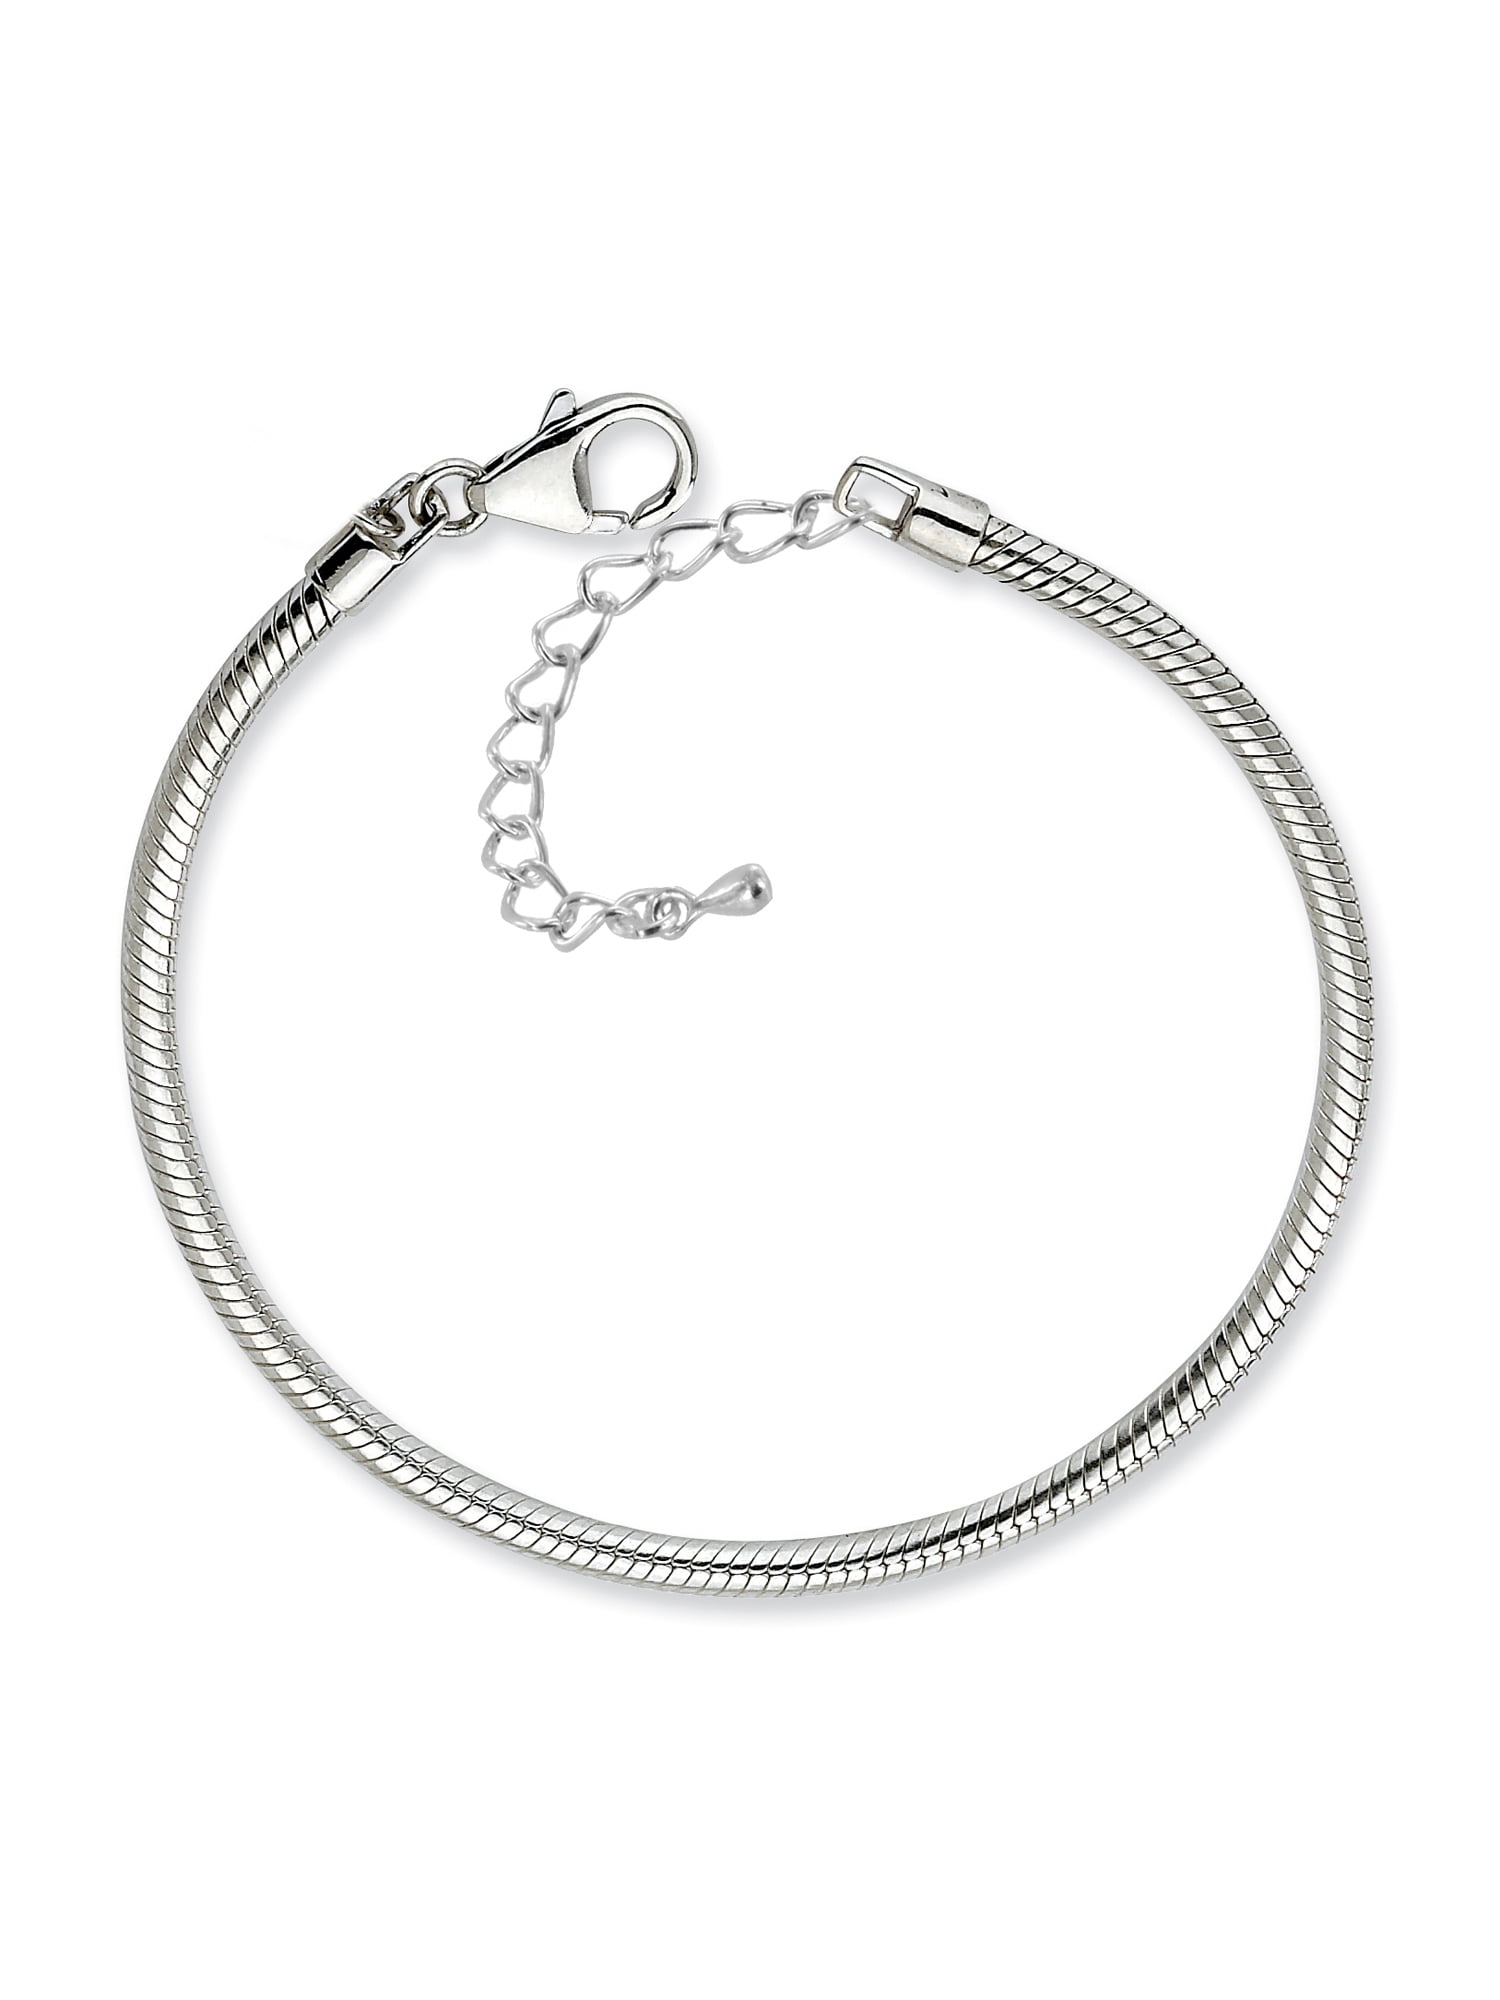 West Coast Jewelry Sterling Silver Snake Anklet 9 Inch